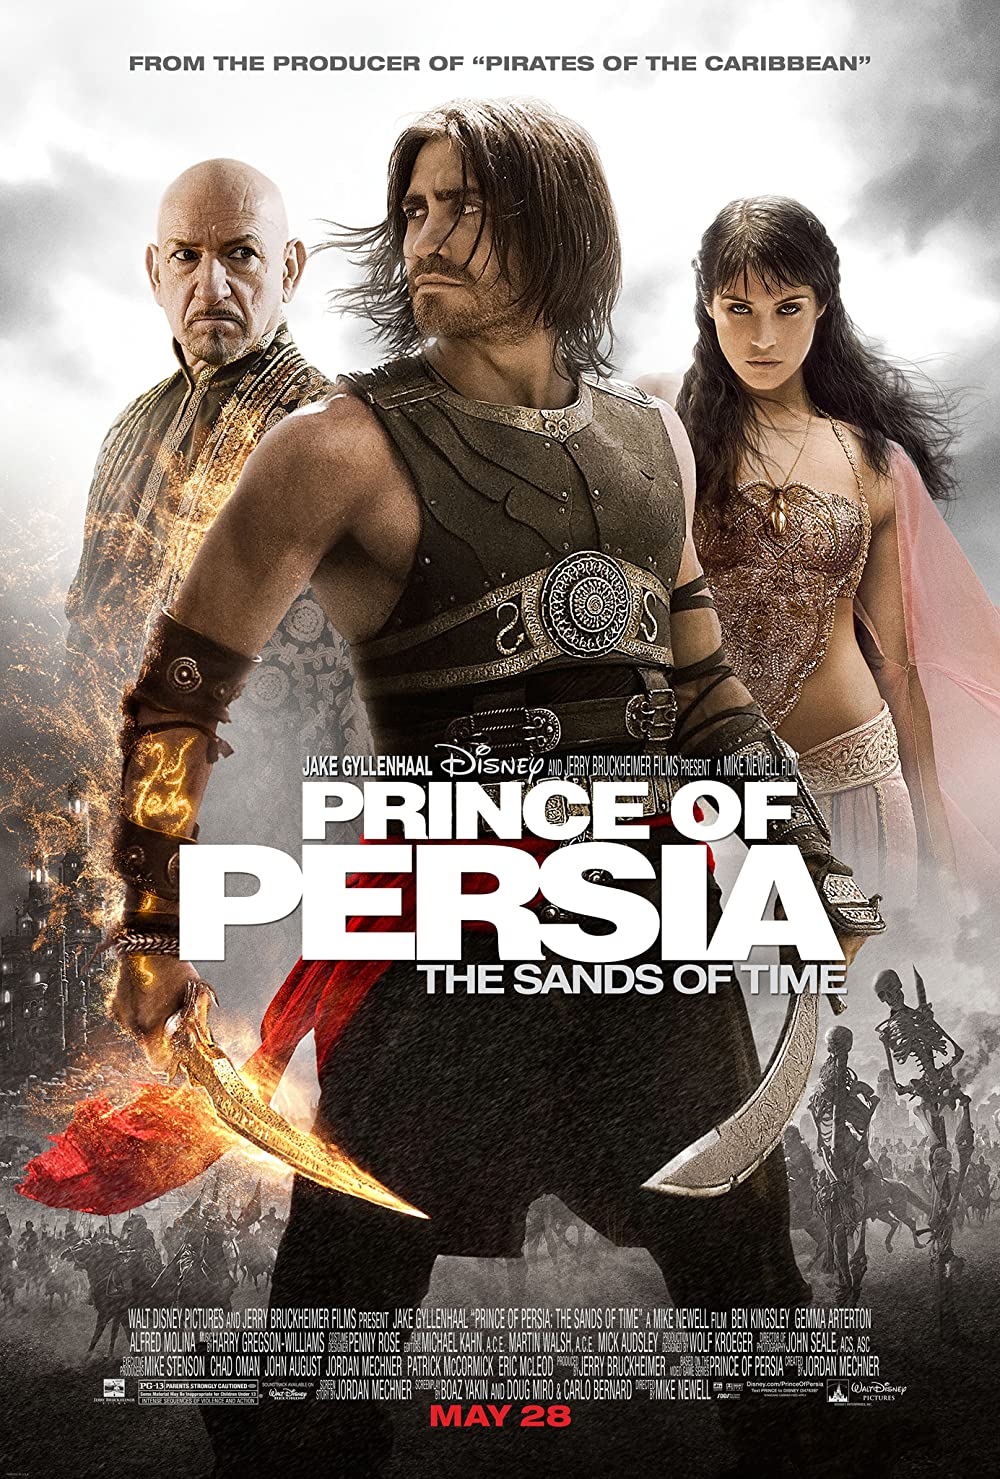 Poster of Prince of Persia The Sands of Time Remake Wallpapers